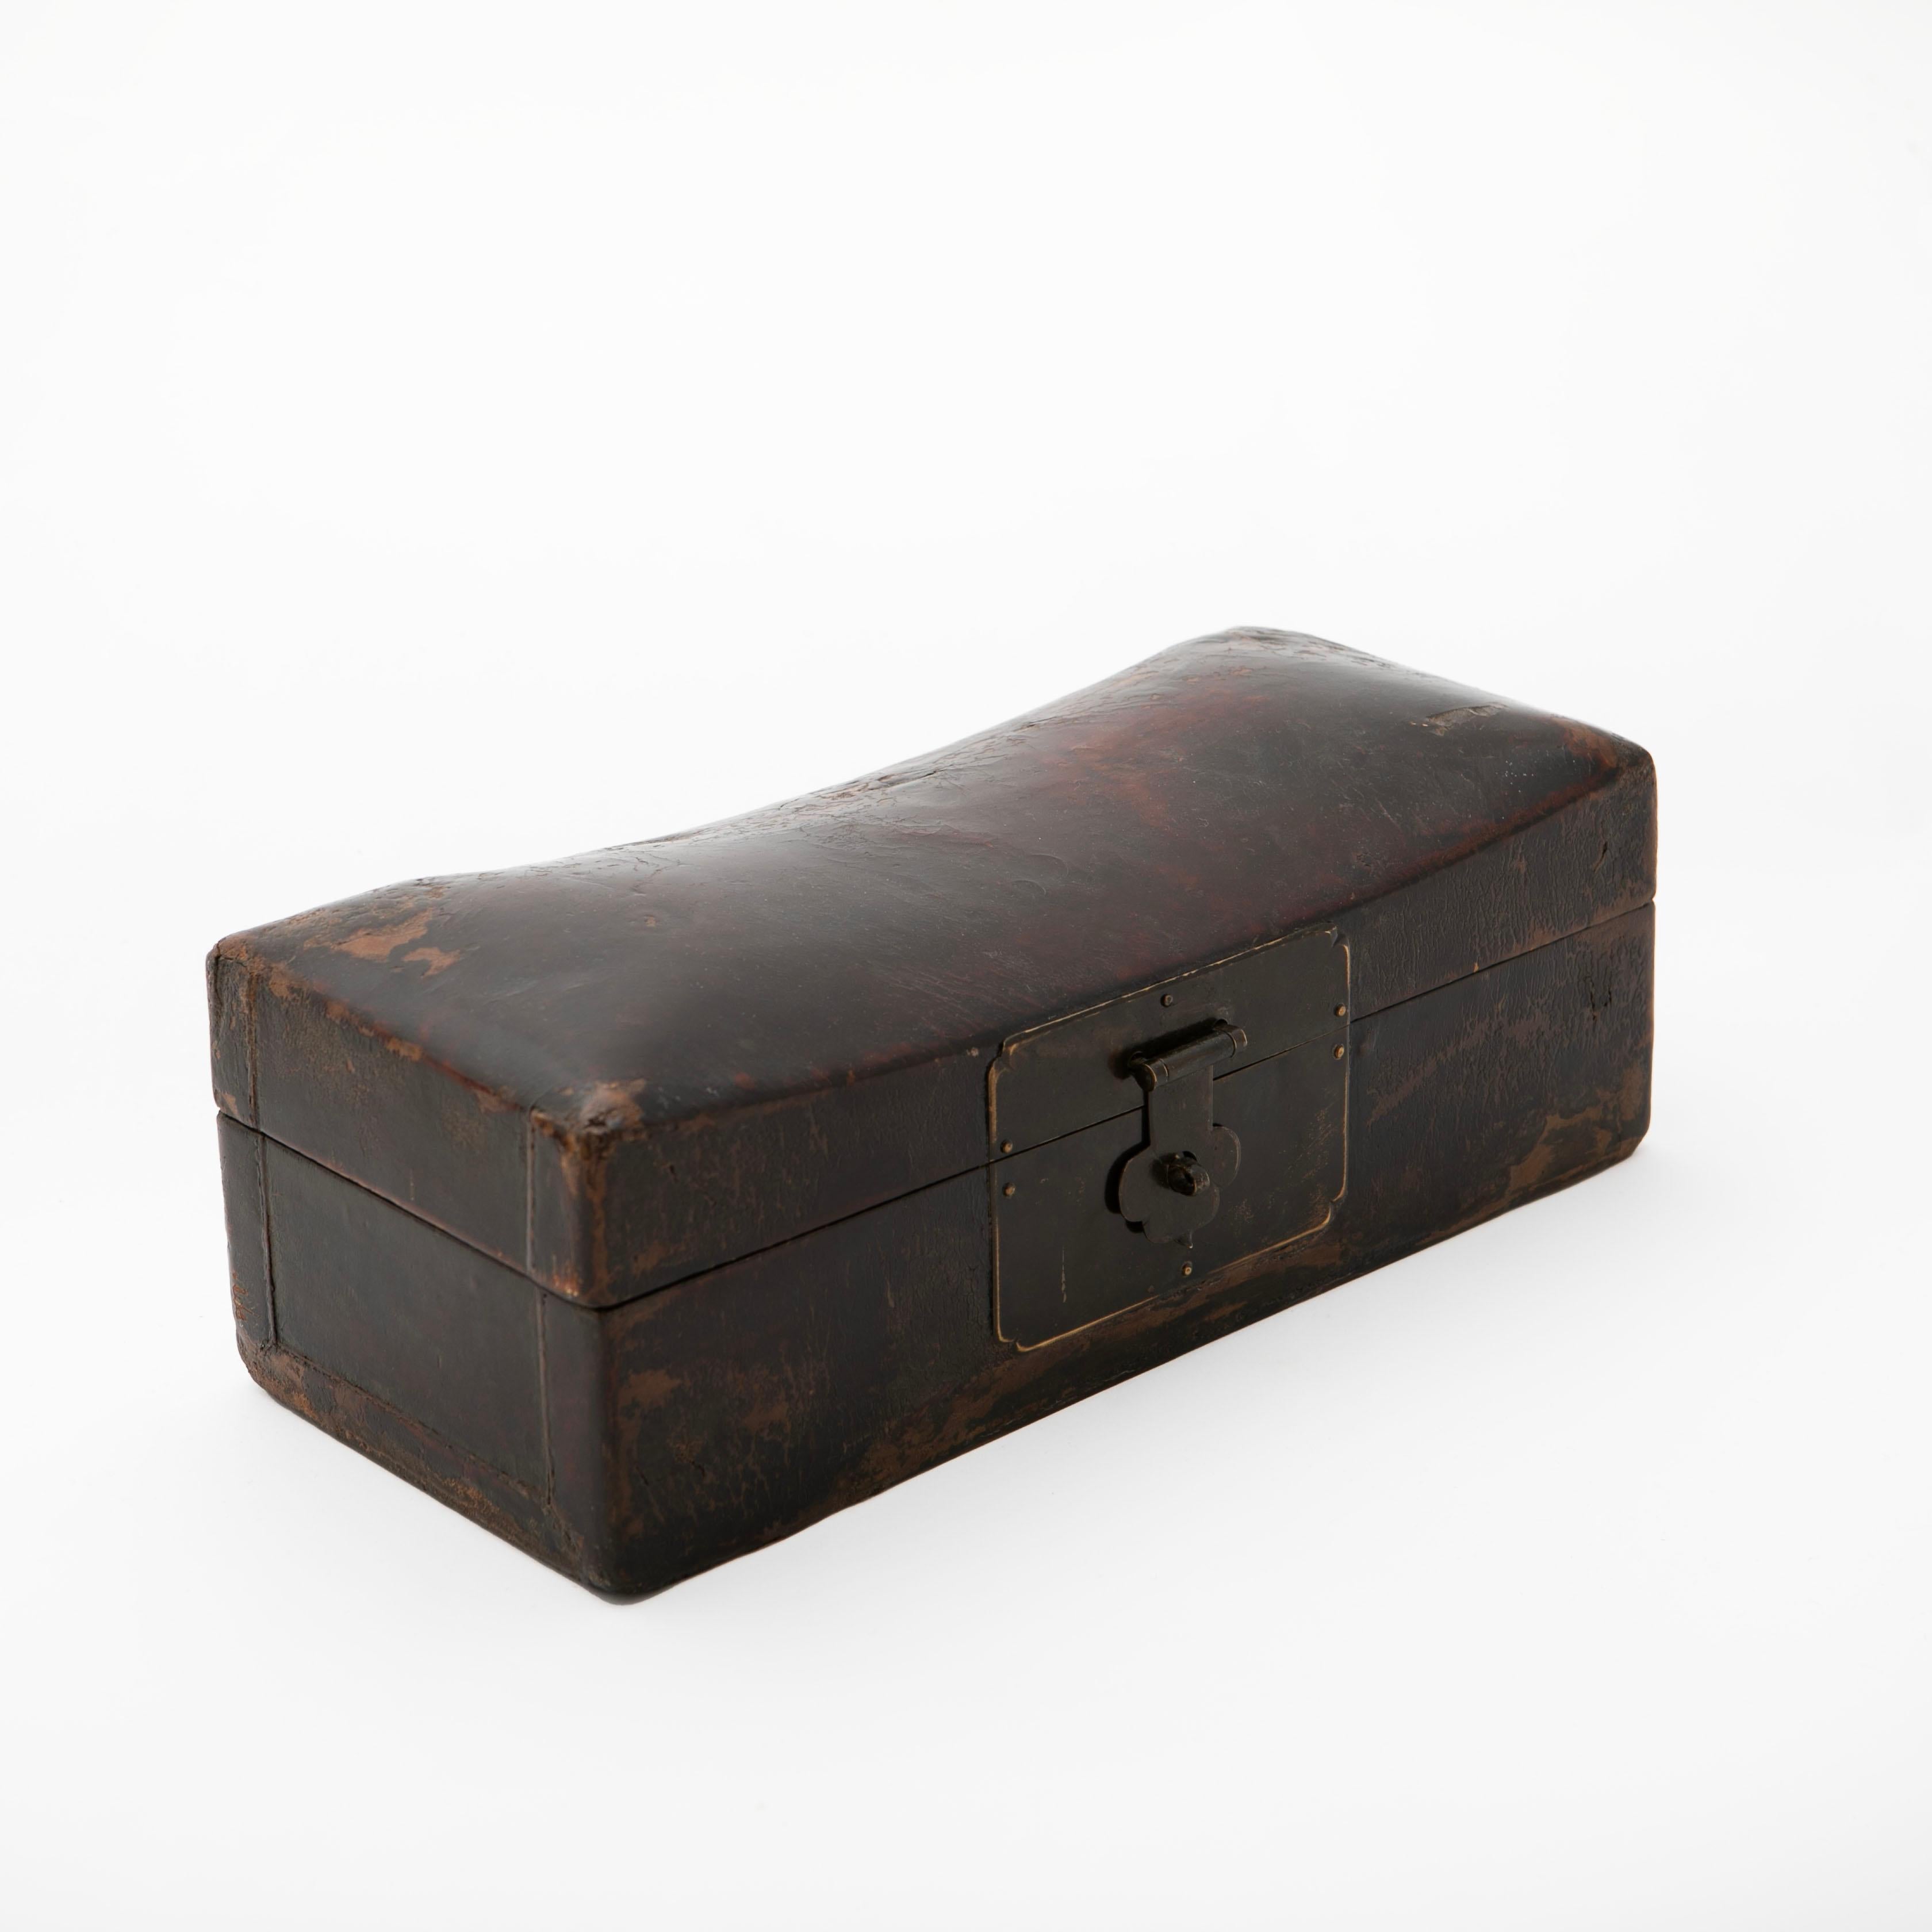 An antique Qing dynasty wooden 'pillow box' covered with leather and a burgundy lacquer finish.
Features a curved top and a patinated brass lock plate.

Originally used as a headrest to store valuables and important documents while sleeping. 

China